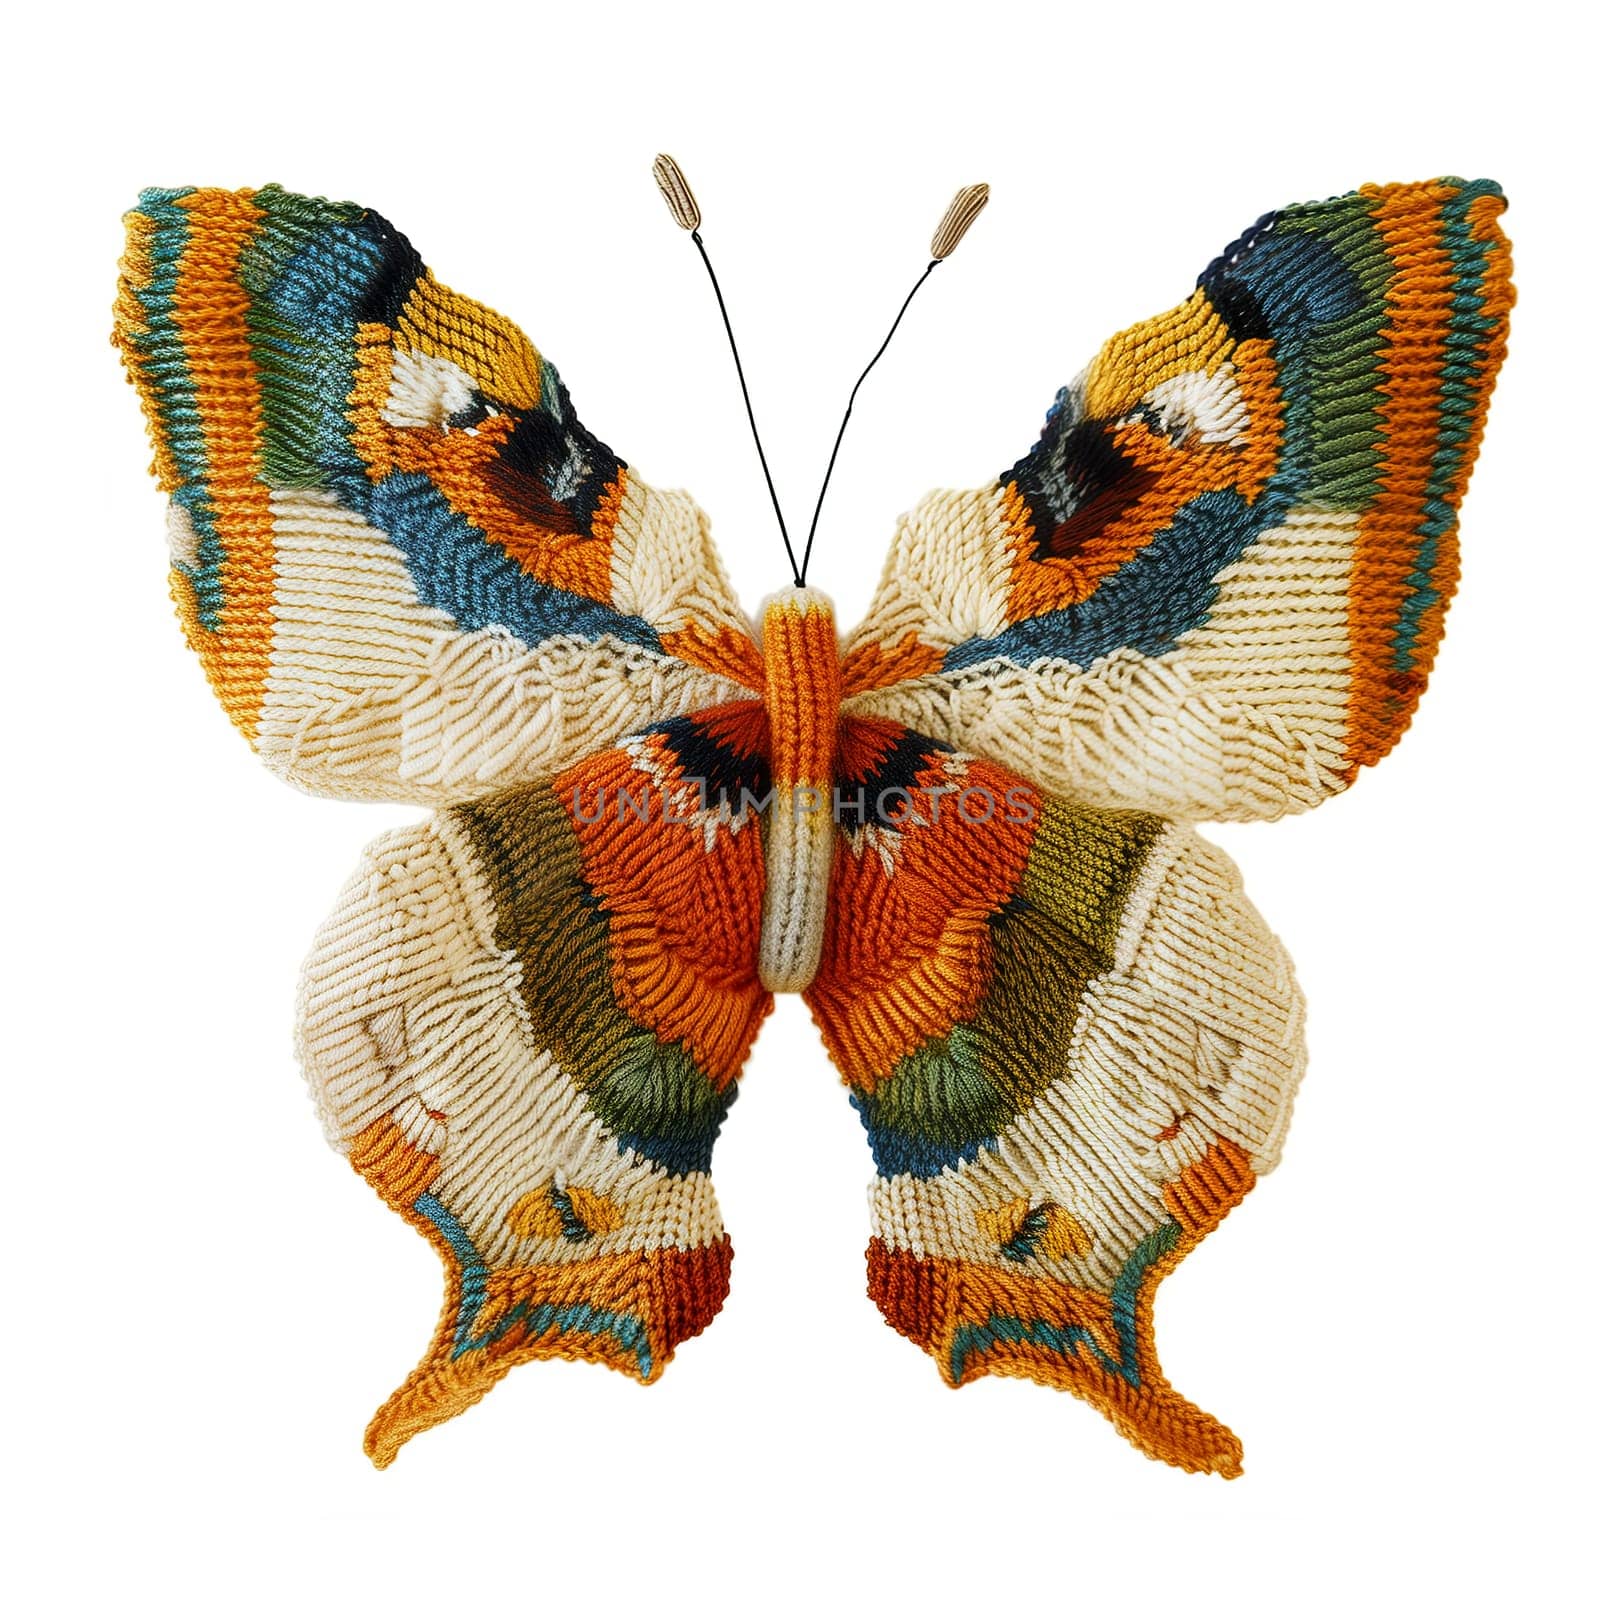 Knitted butterfly with a colorful pattern by Dustick